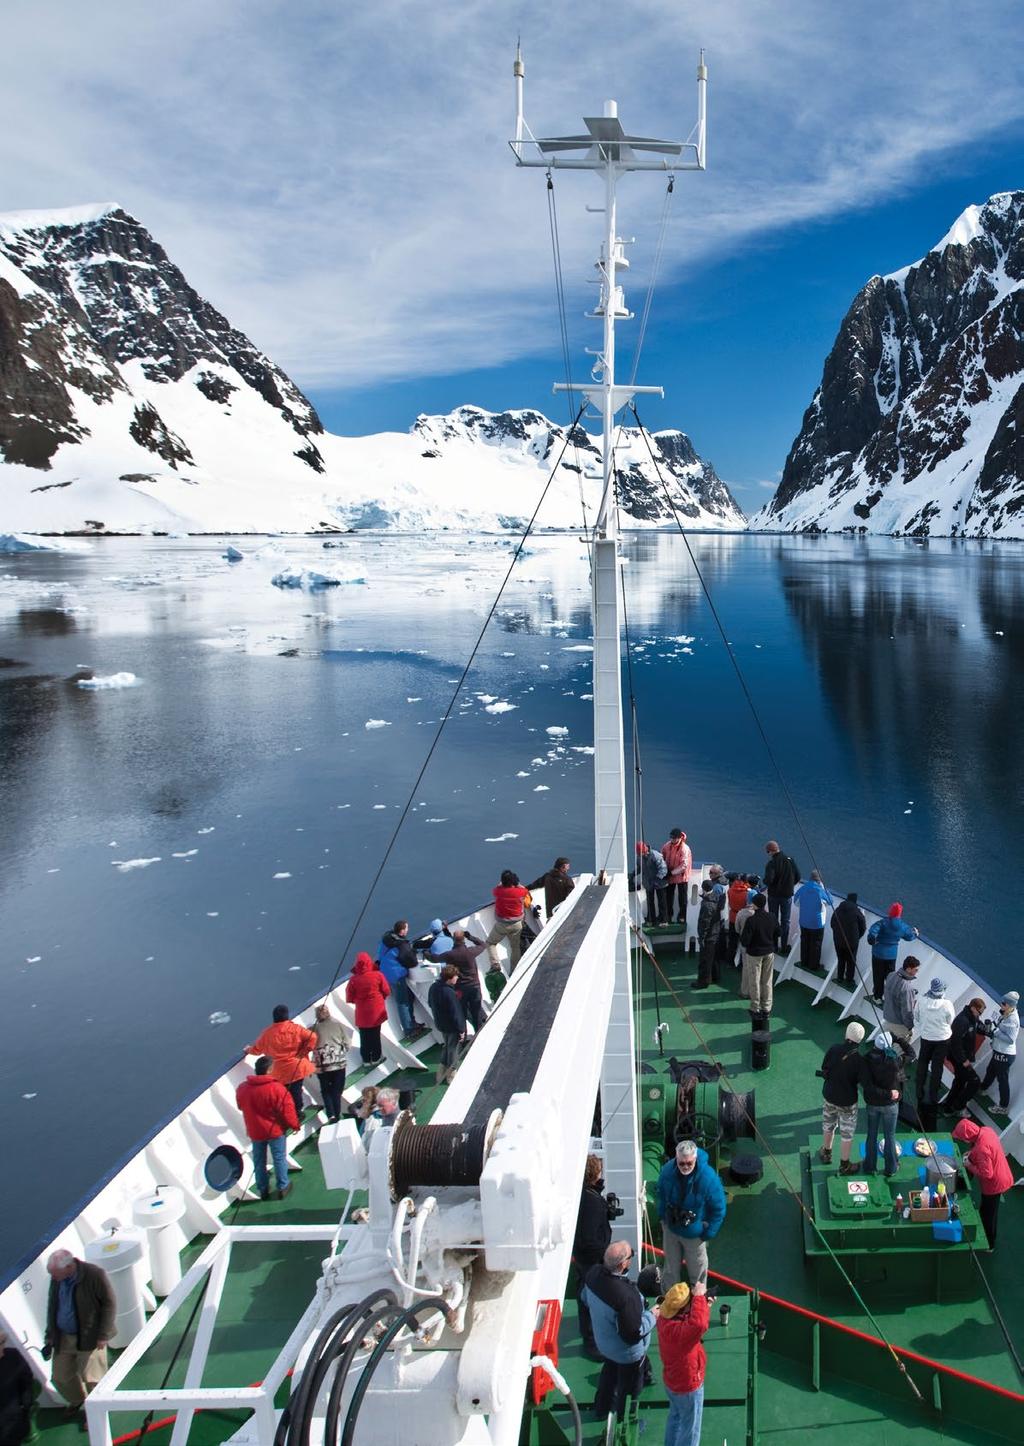 ANTARCTICA & PATAGONIA: GET READY FOR THE ULTIMATE ADVENTURE! We ve teamed up two of the most unique and spectacular destinations Antarctica & Patagonia to provide you with the ultimate adventure.